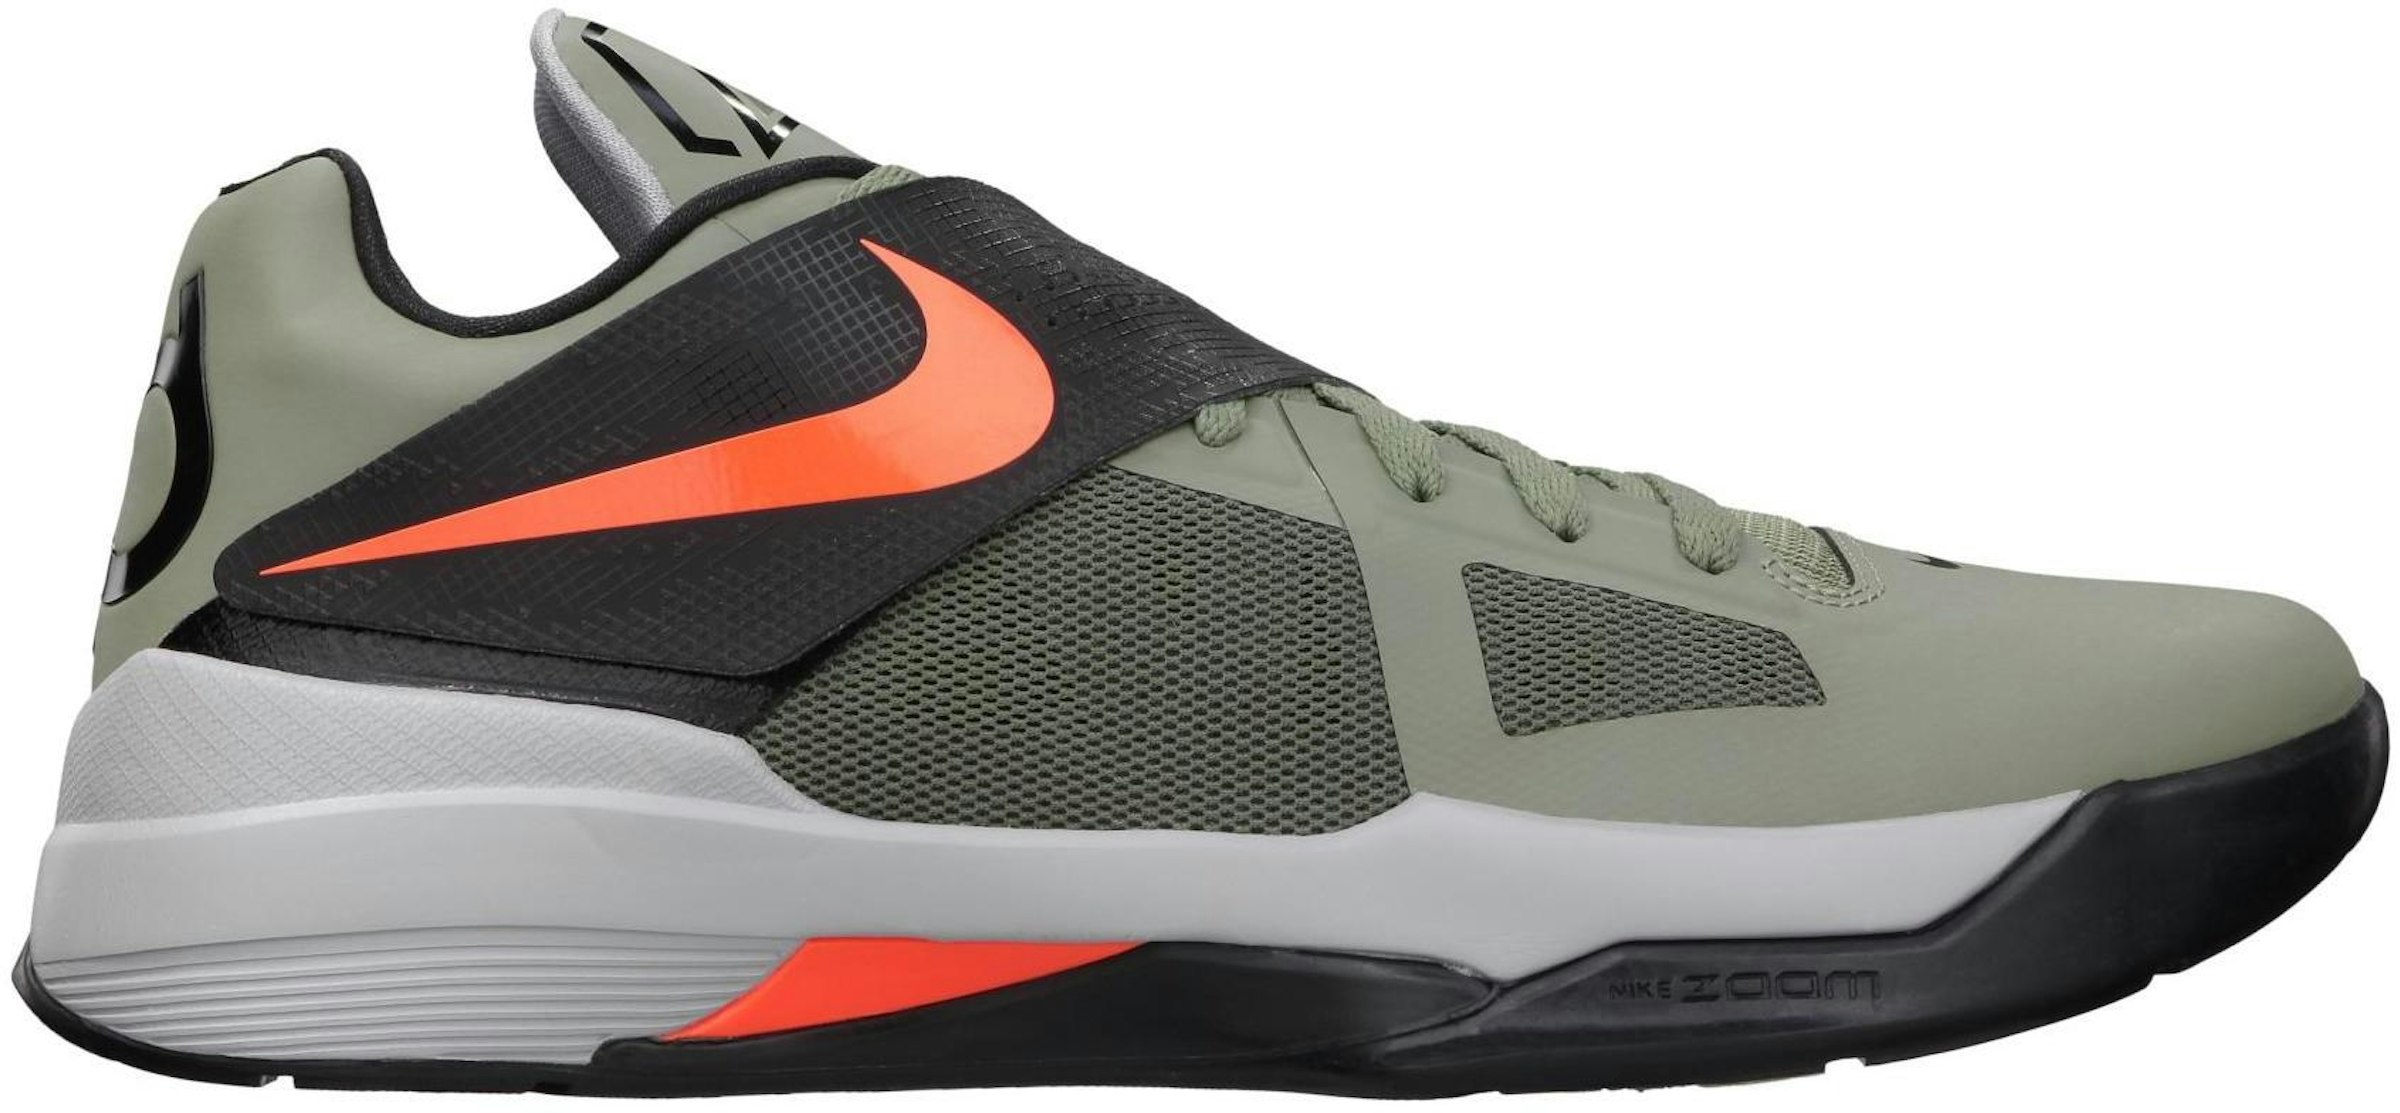 Nike 4 Rogue Green Undefeated Men's - 473679-302 -